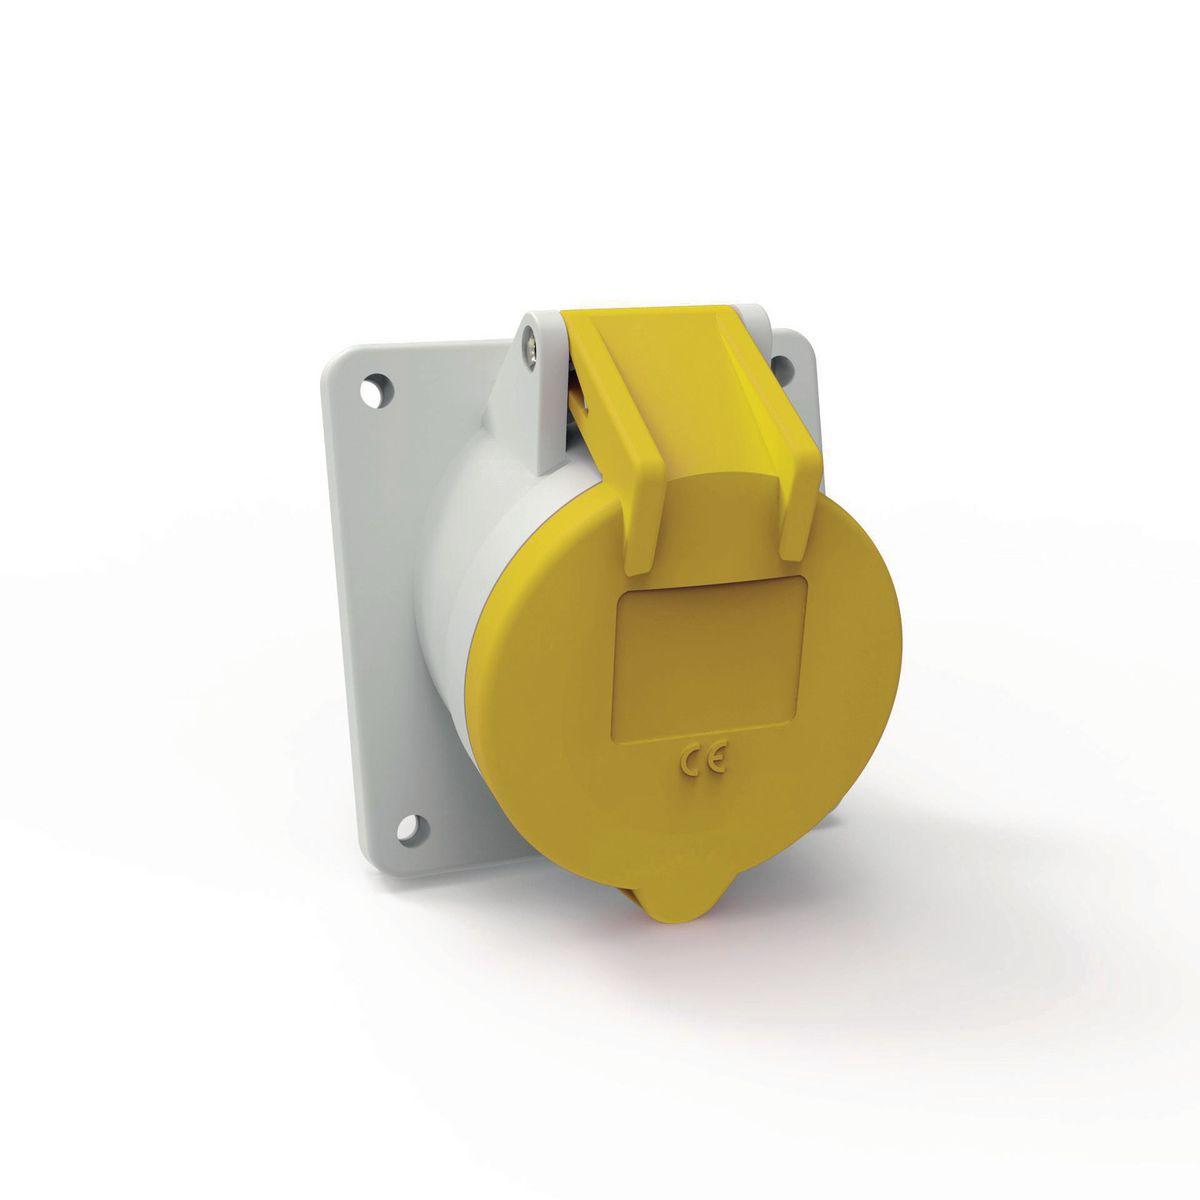 Hubbell C330R4SA Heavy Duty Products, IEC Pin and Sleeve Devices, Hubbell-PRO, Female, Receptacle, 30 A 125 VAC, 2-POLE 3-WIRE, Yellow, Splash Proof  ; IP44 environmental ratings ; Impact and corrosion resistant insulated non-metallic housing ; Sequential contact engageme